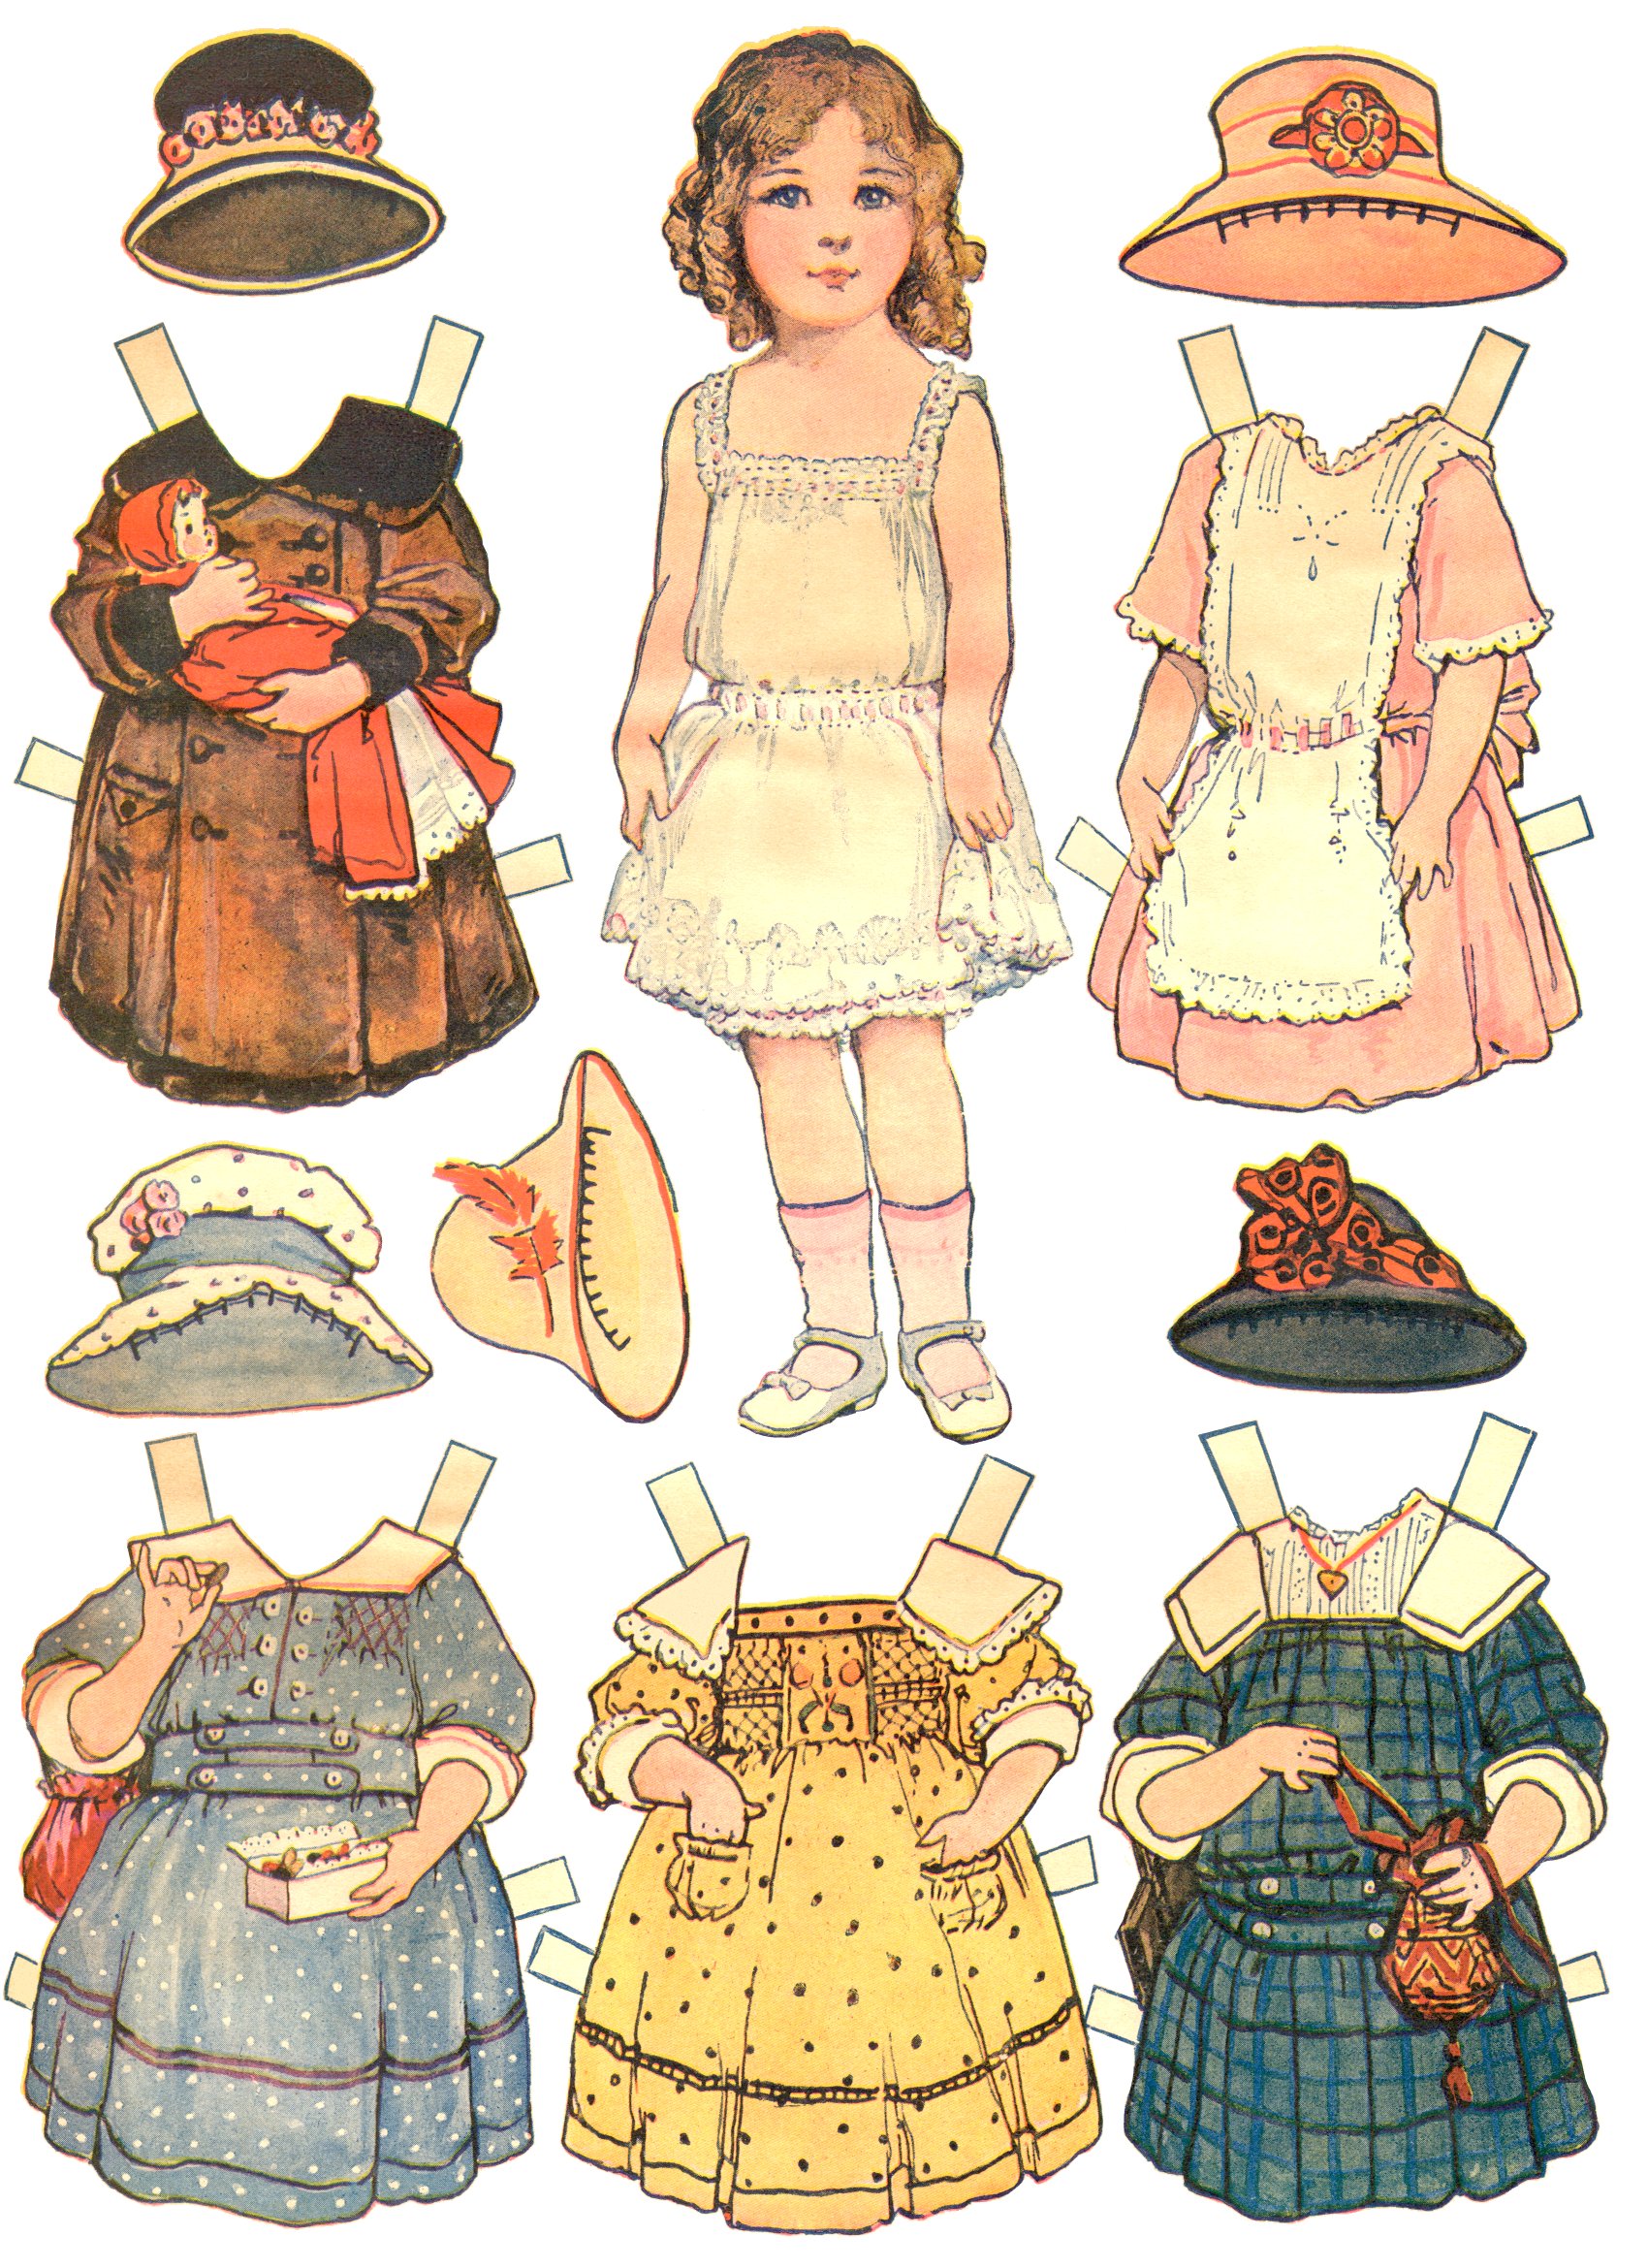 8 Best Images of Family Paper Dolls Printable Family Paper Dolls